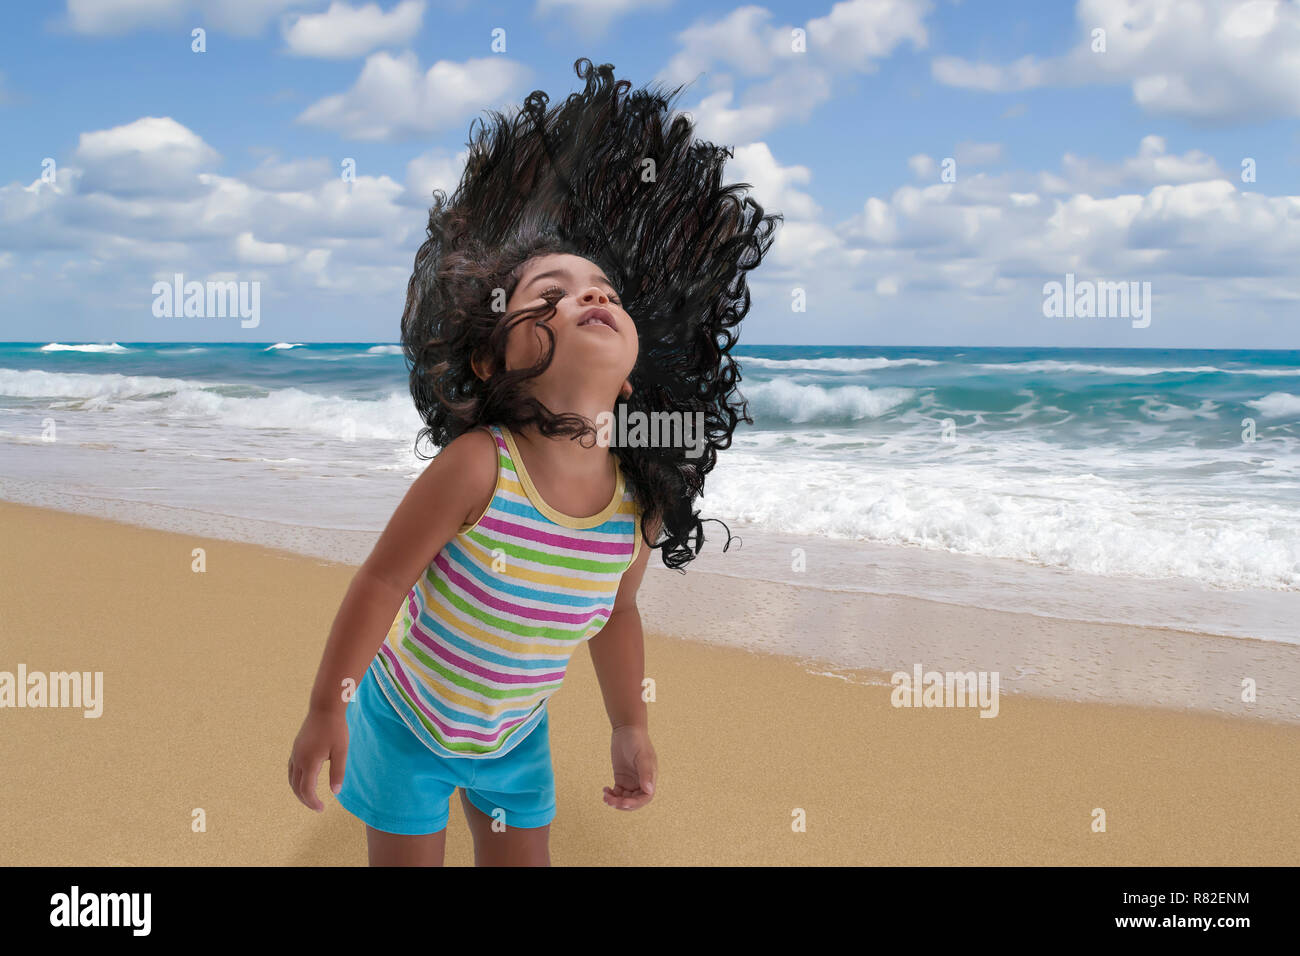 Young girl flings her long black hair upwards with excitement at the beach while the waves crash to the shore in the background. Stock Photo